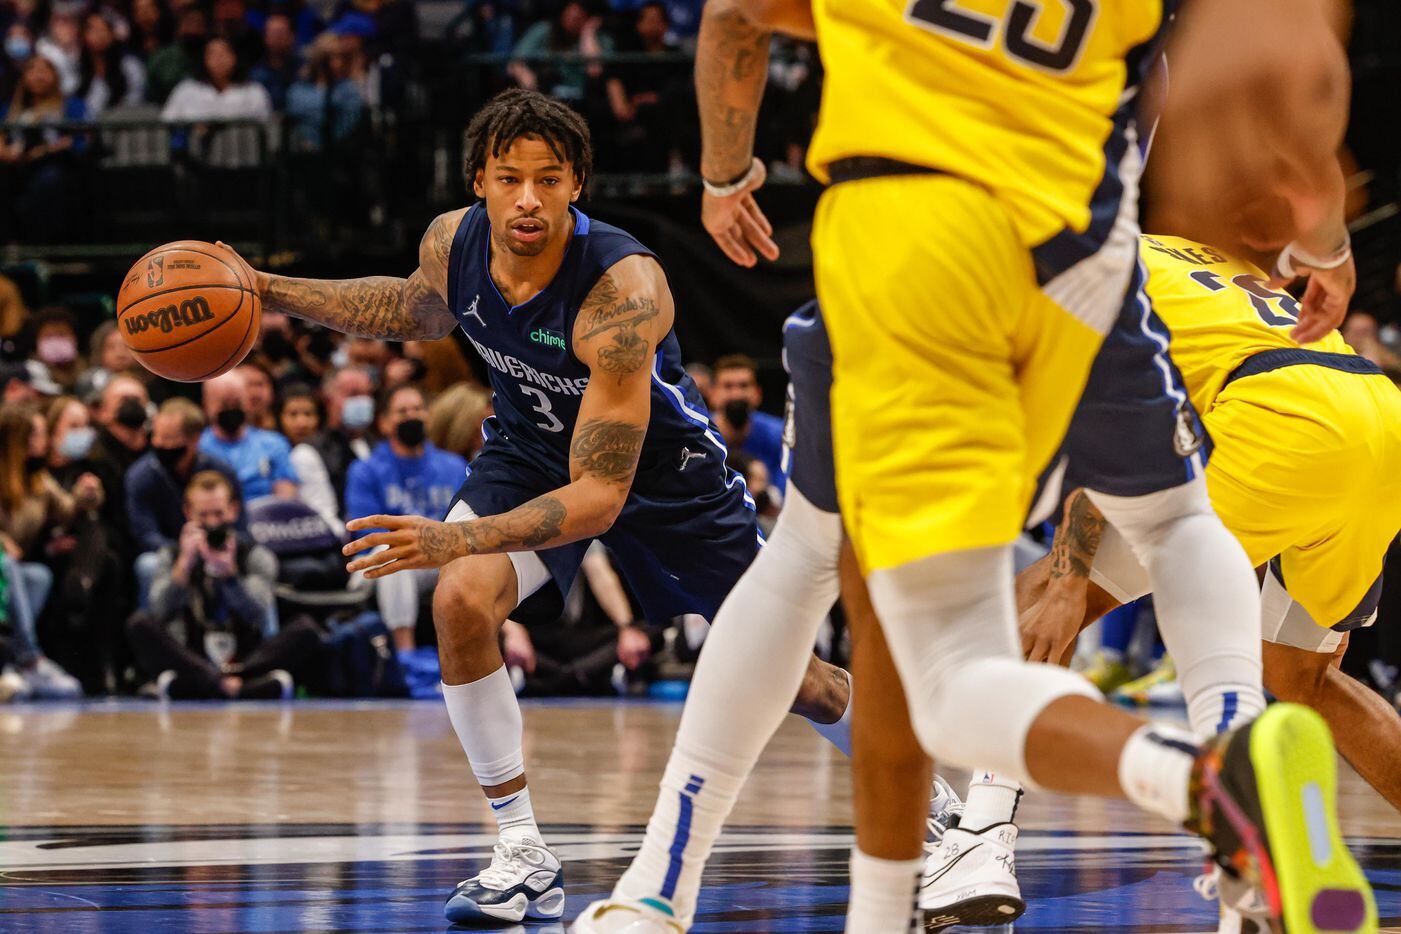 Dallas Mavericks guard Trey Burke (3) drives to the basket against the Indiana Pacers during the second half at the American Airlines Center in Dallas on Saturday, January 29, 2022.